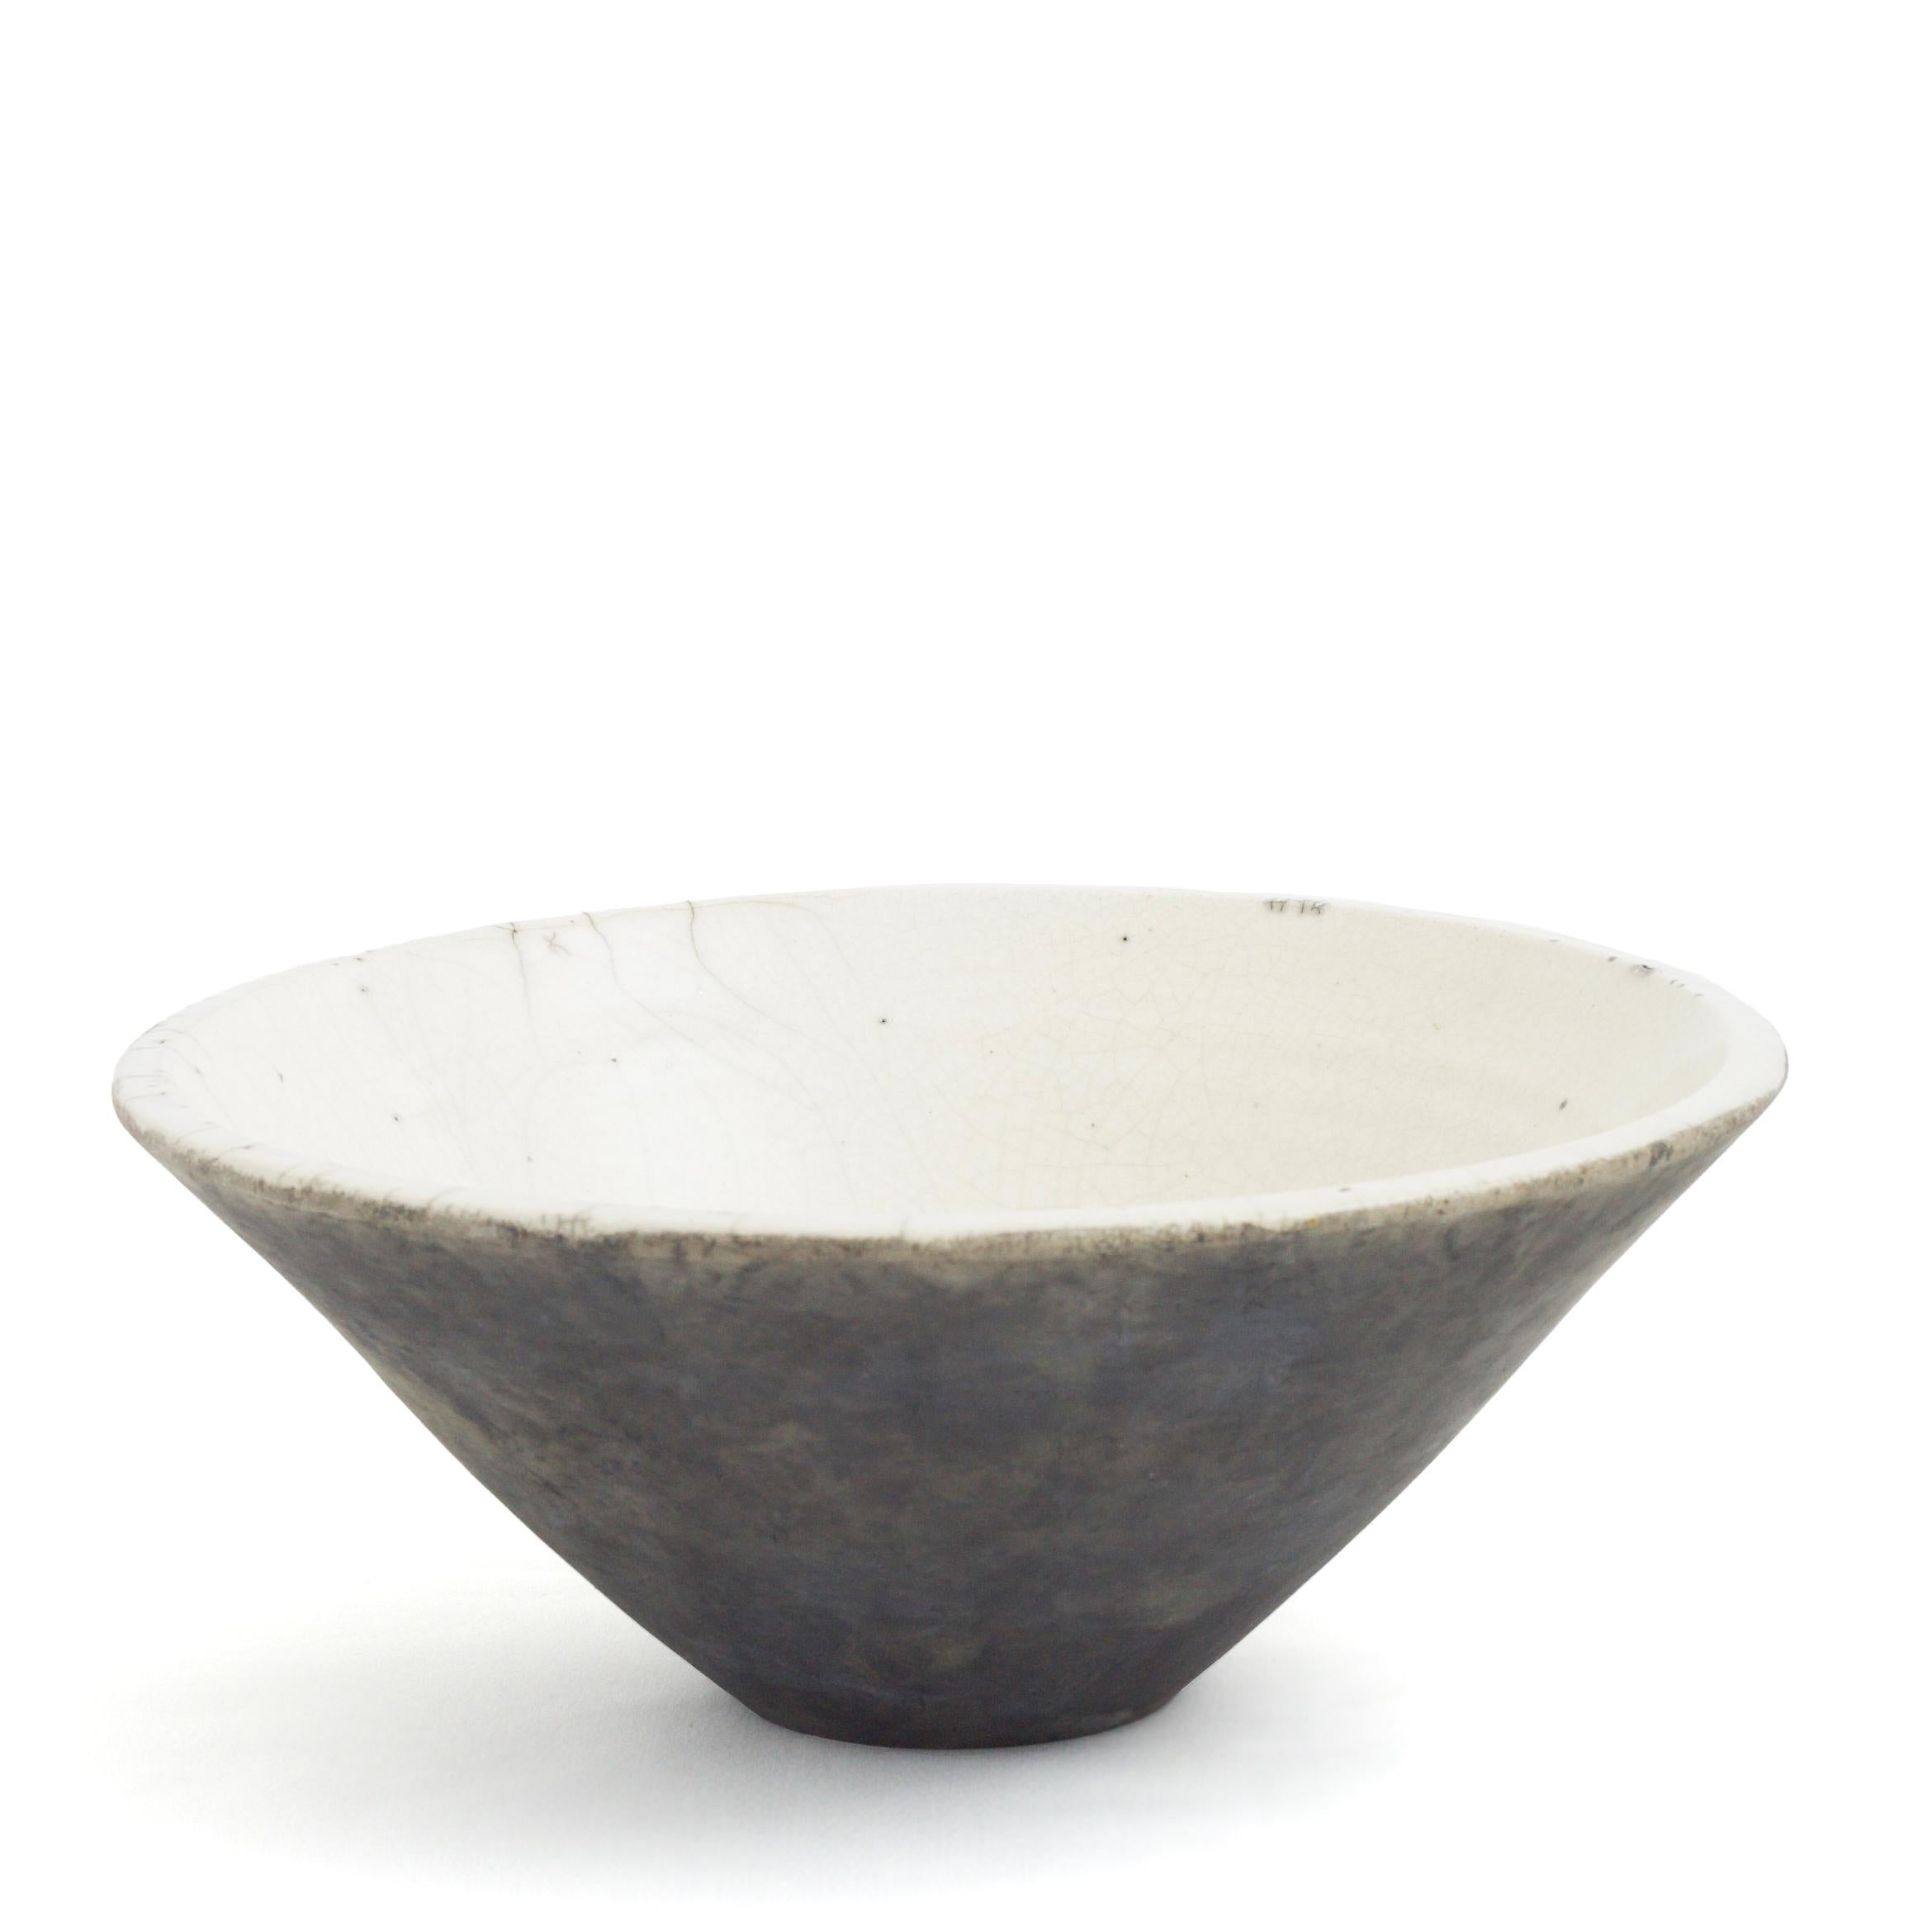 Japanese Modern LAAB Wu Set of 2 Bowls Raku Ceramics Crackle Black White In New Condition For Sale In monza, Monza and Brianza